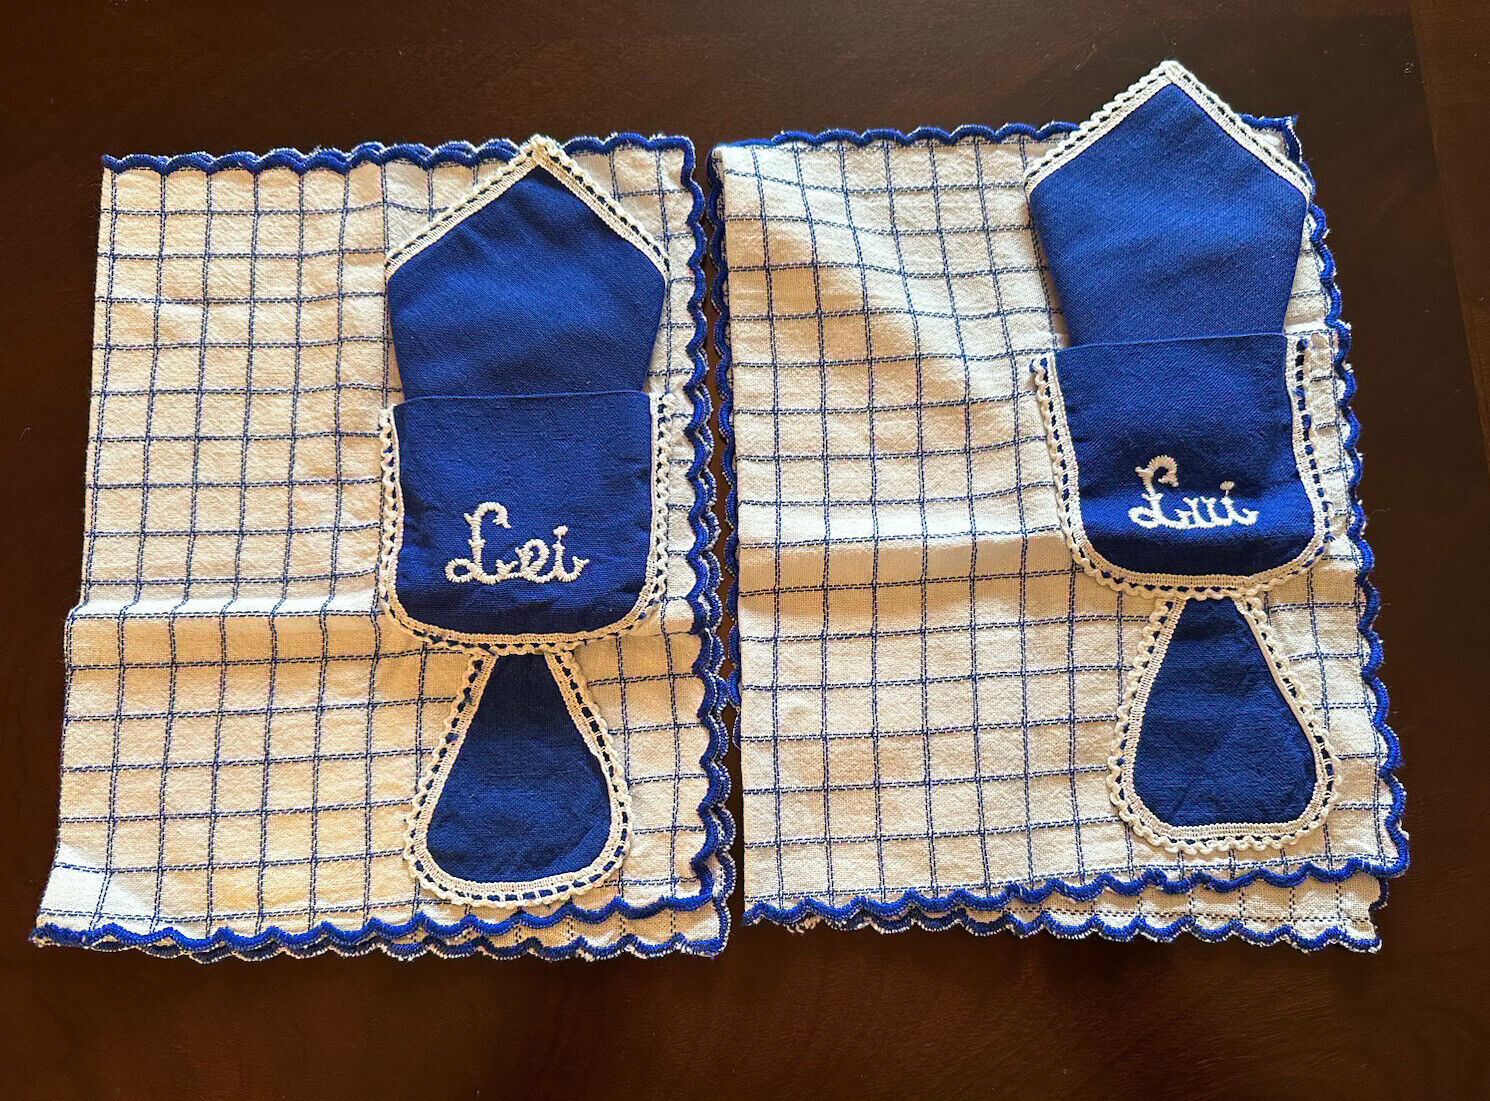 Vintage His & Hers placemats And Napkins set Lui & Lei Handmade Italy Italian